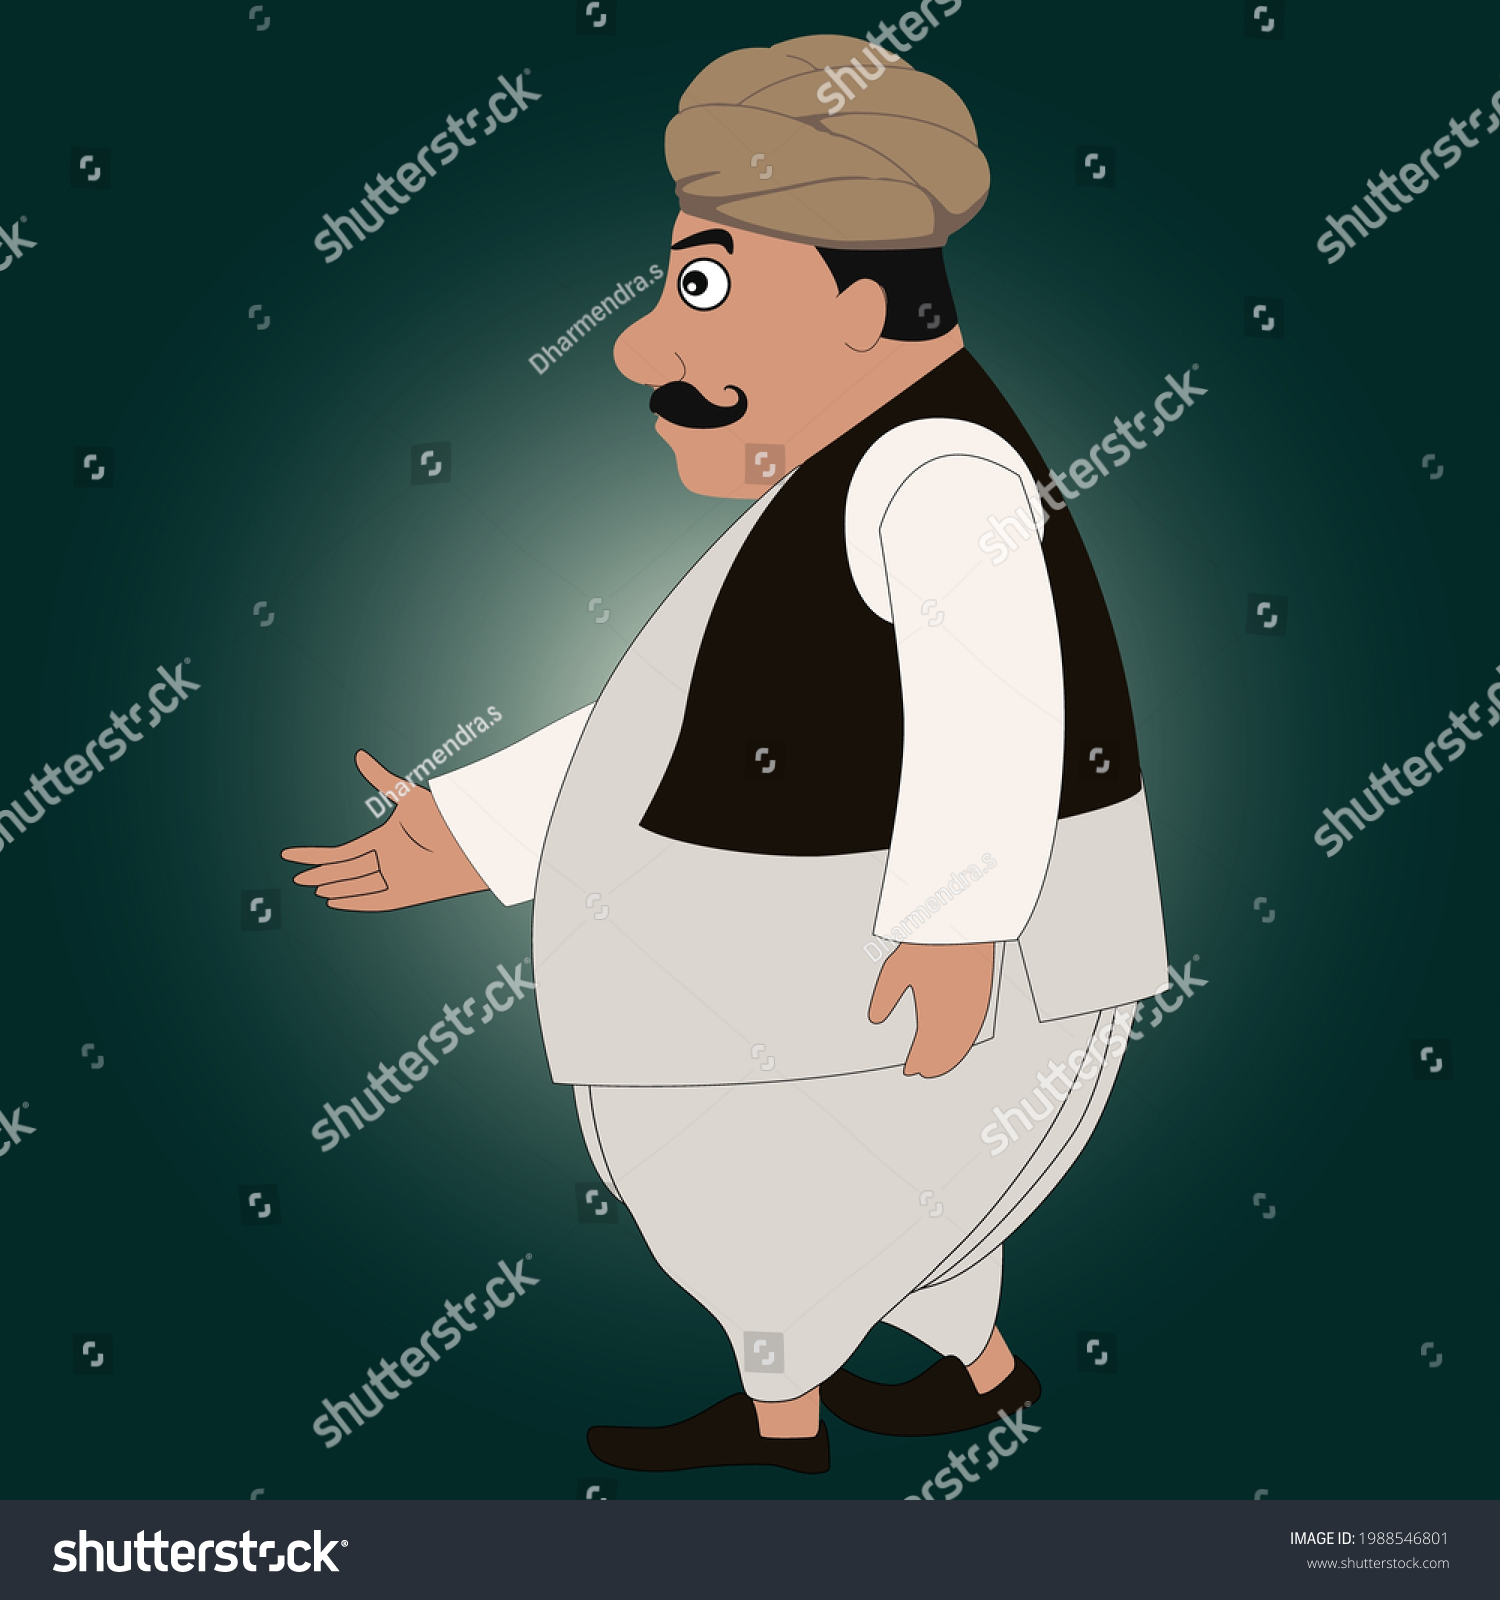 Indian Businessman Village Man Traditional Stock Vector (Royalty Free ...